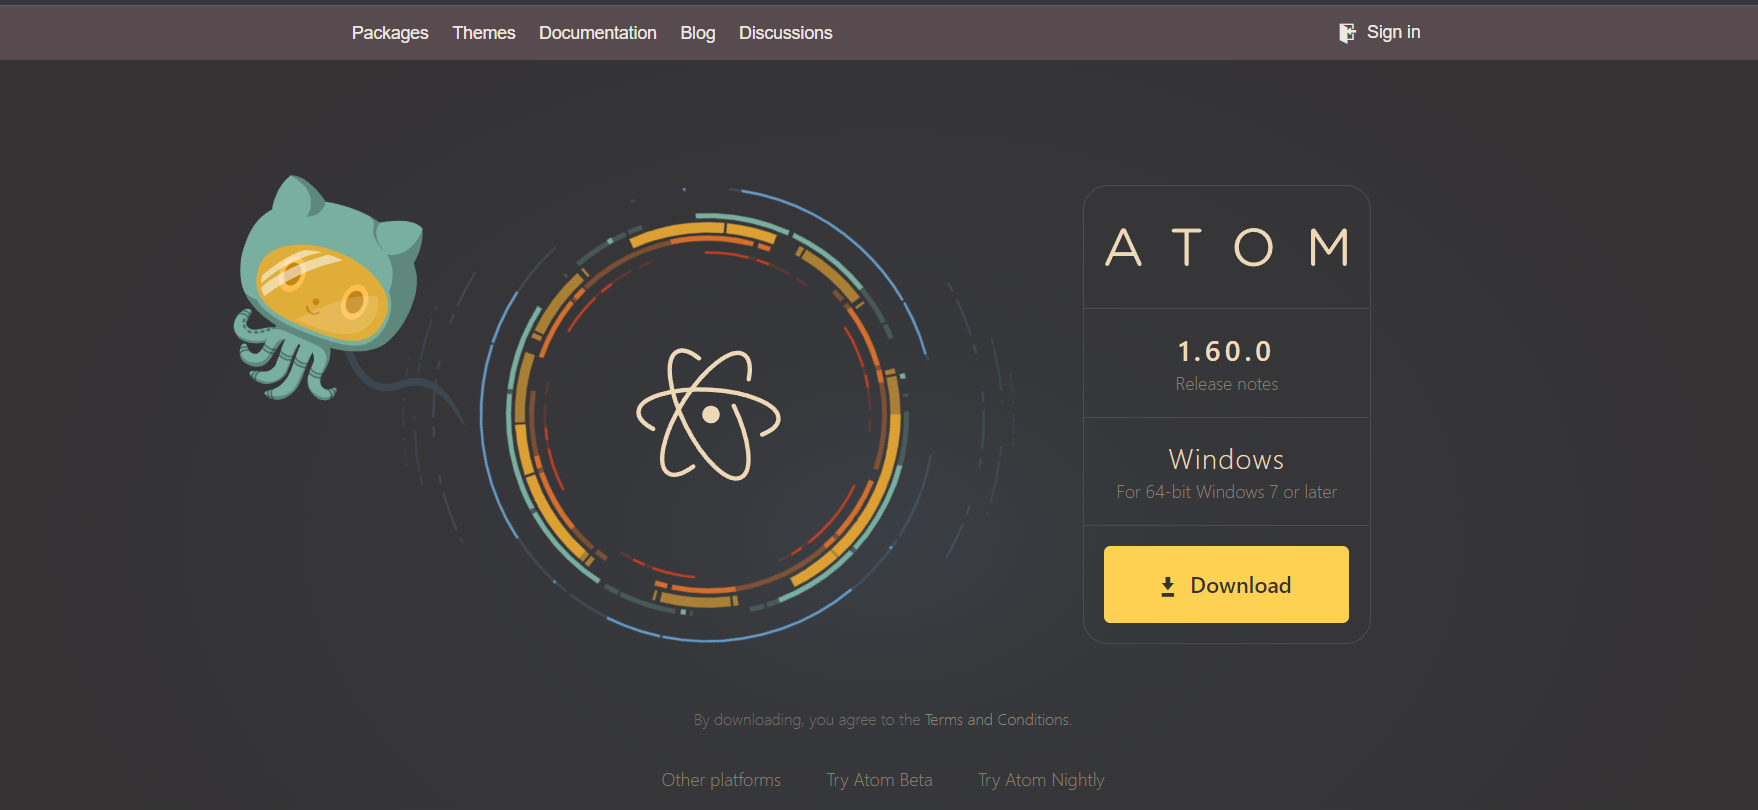 How to set up Atom for python in 2022